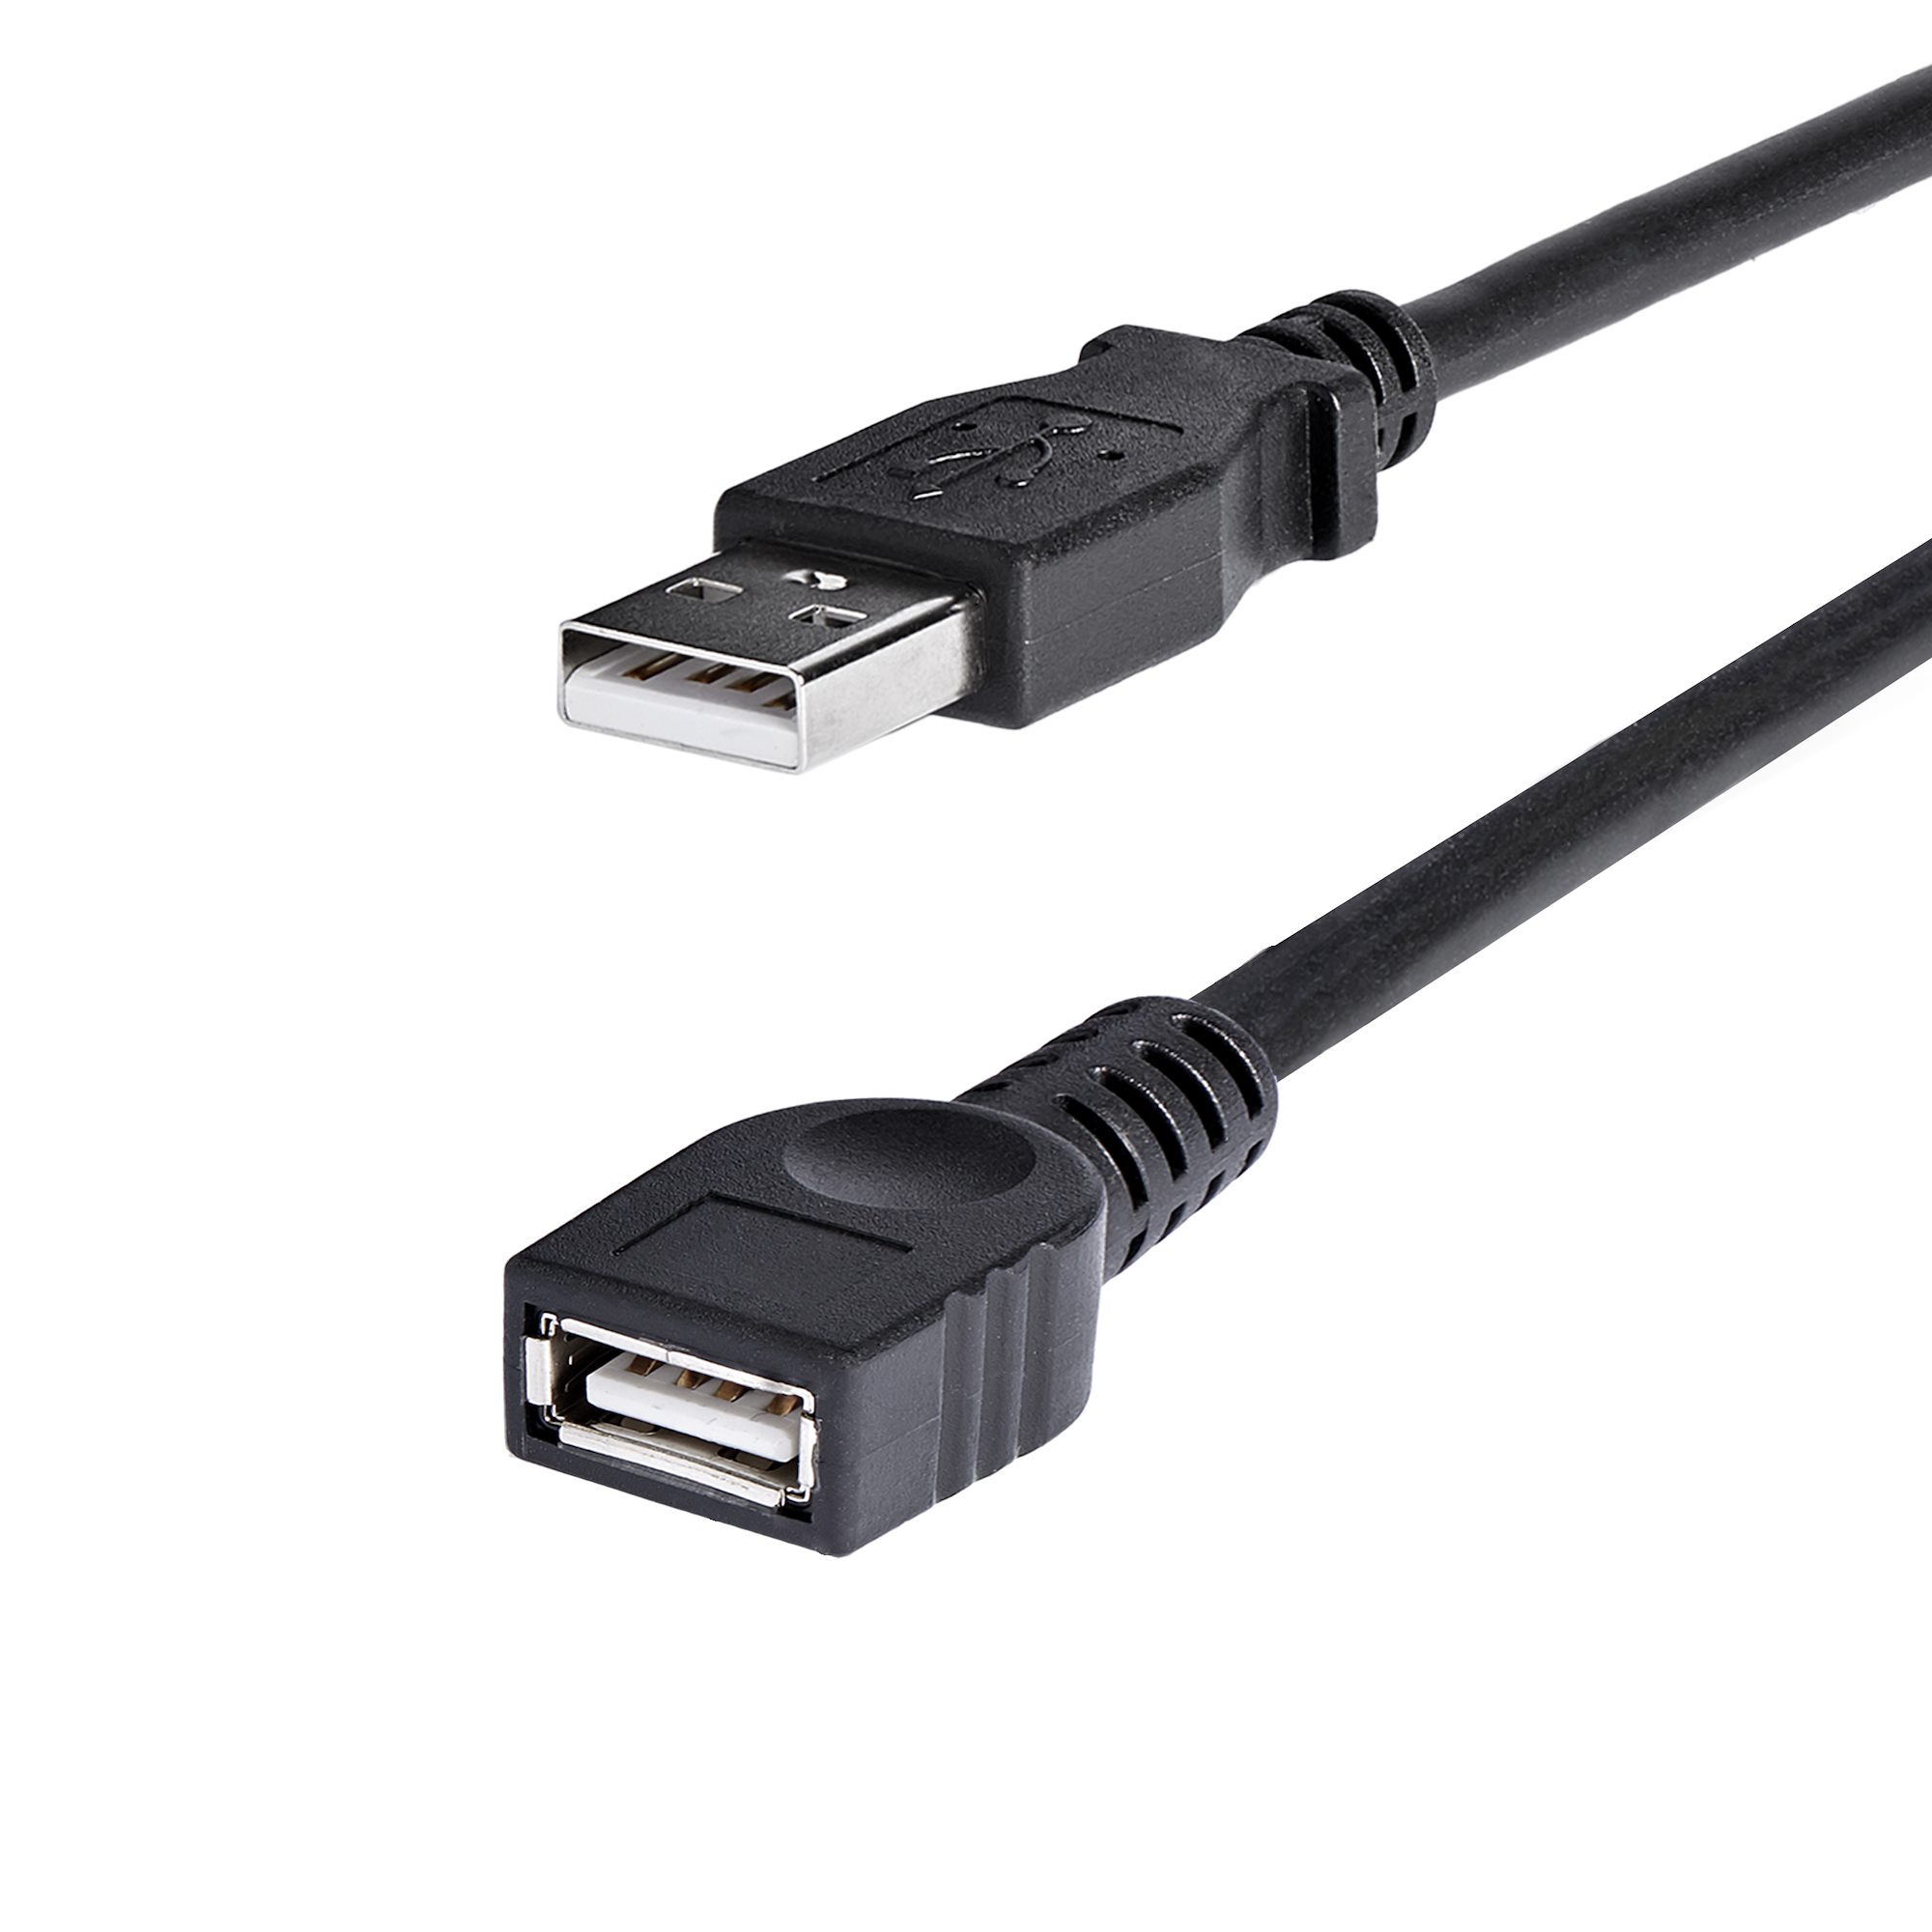 6 ft Black USB Extension Cable A to - USB 2.0 Cables StarTech.com